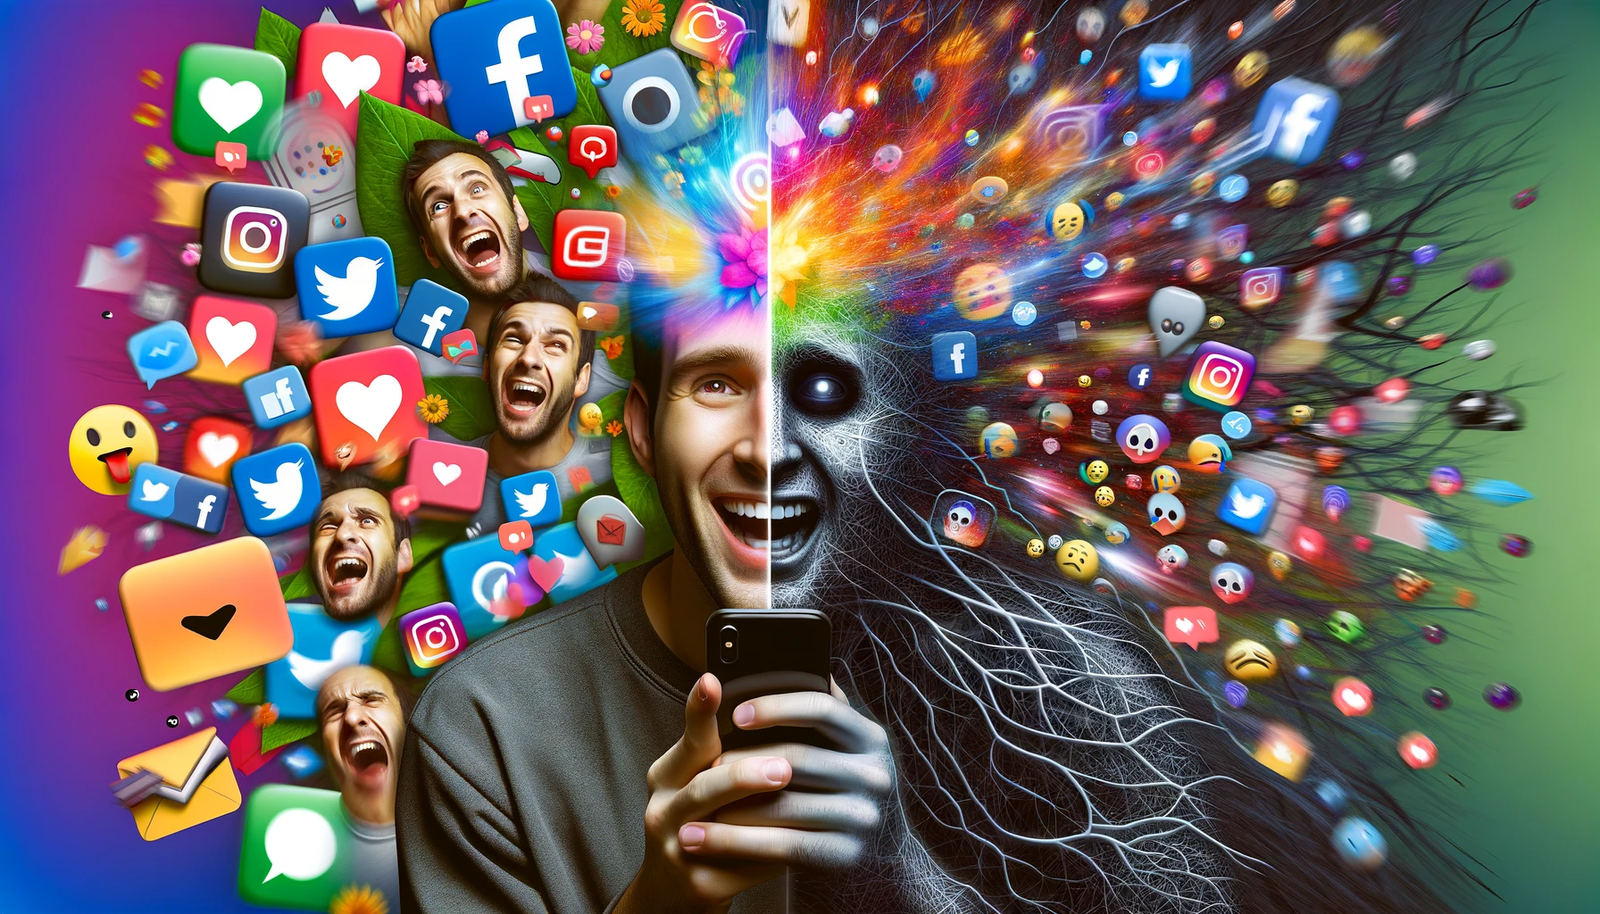 Split-scene image depicting the contrasting effects of social media on mental health, with one side showing a person happily engaging with vibrant social media icons, and the other side portraying the same person overwhelmed by dark, oppressive social media symbols, illustrating the dual nature of digital connectivity and mental strain.